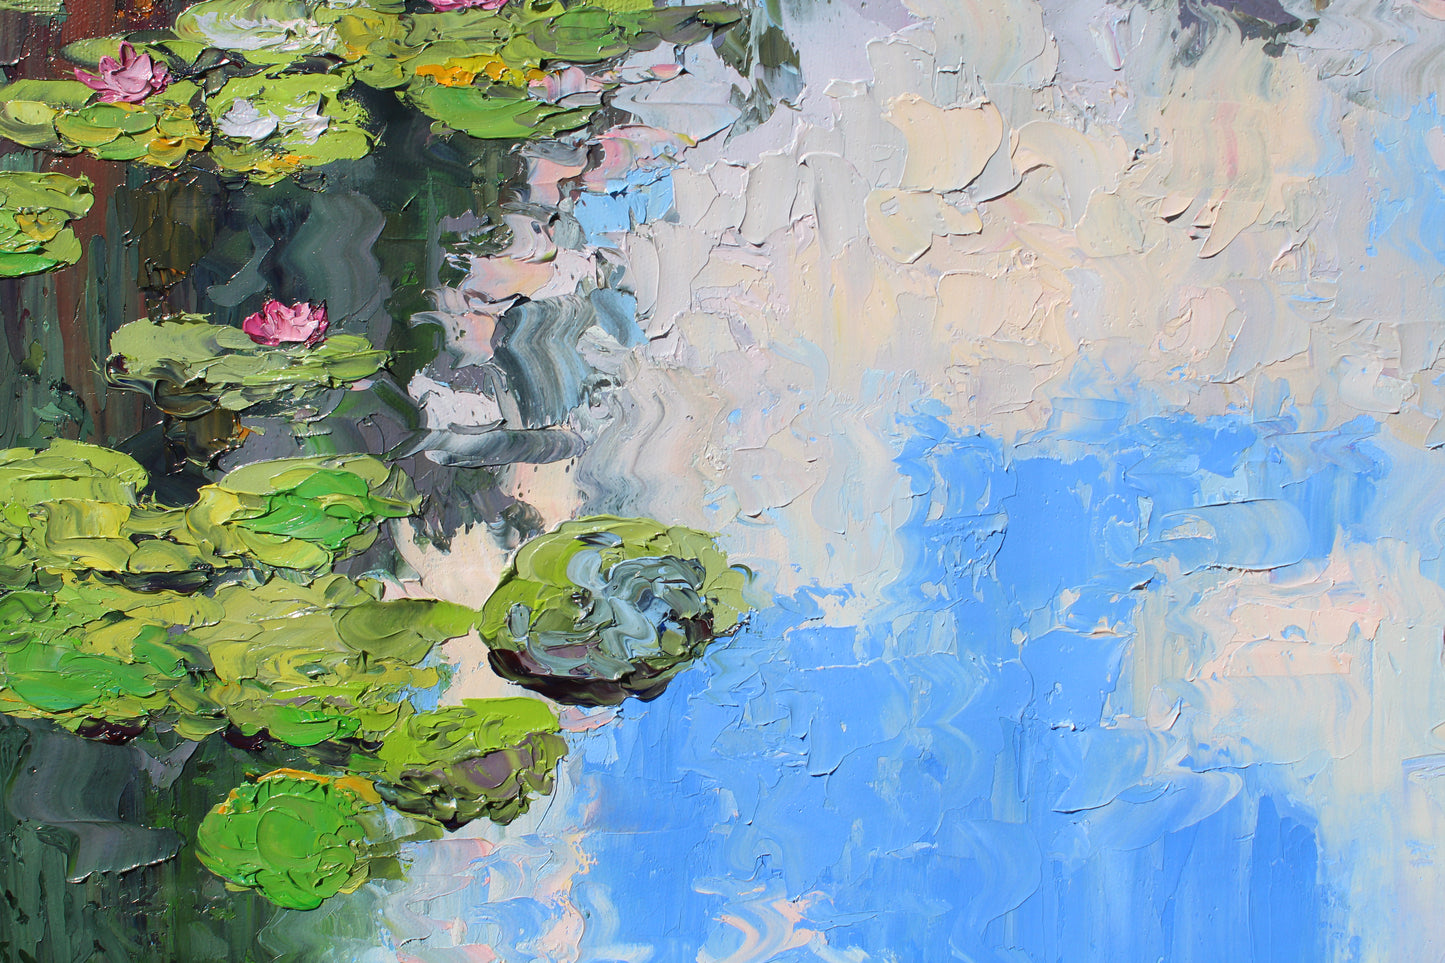 Dreaming Of Giverny, An Original 18" x 20" Garden Landscape Of Monet's Waterlily Pond, Oil On Canvas